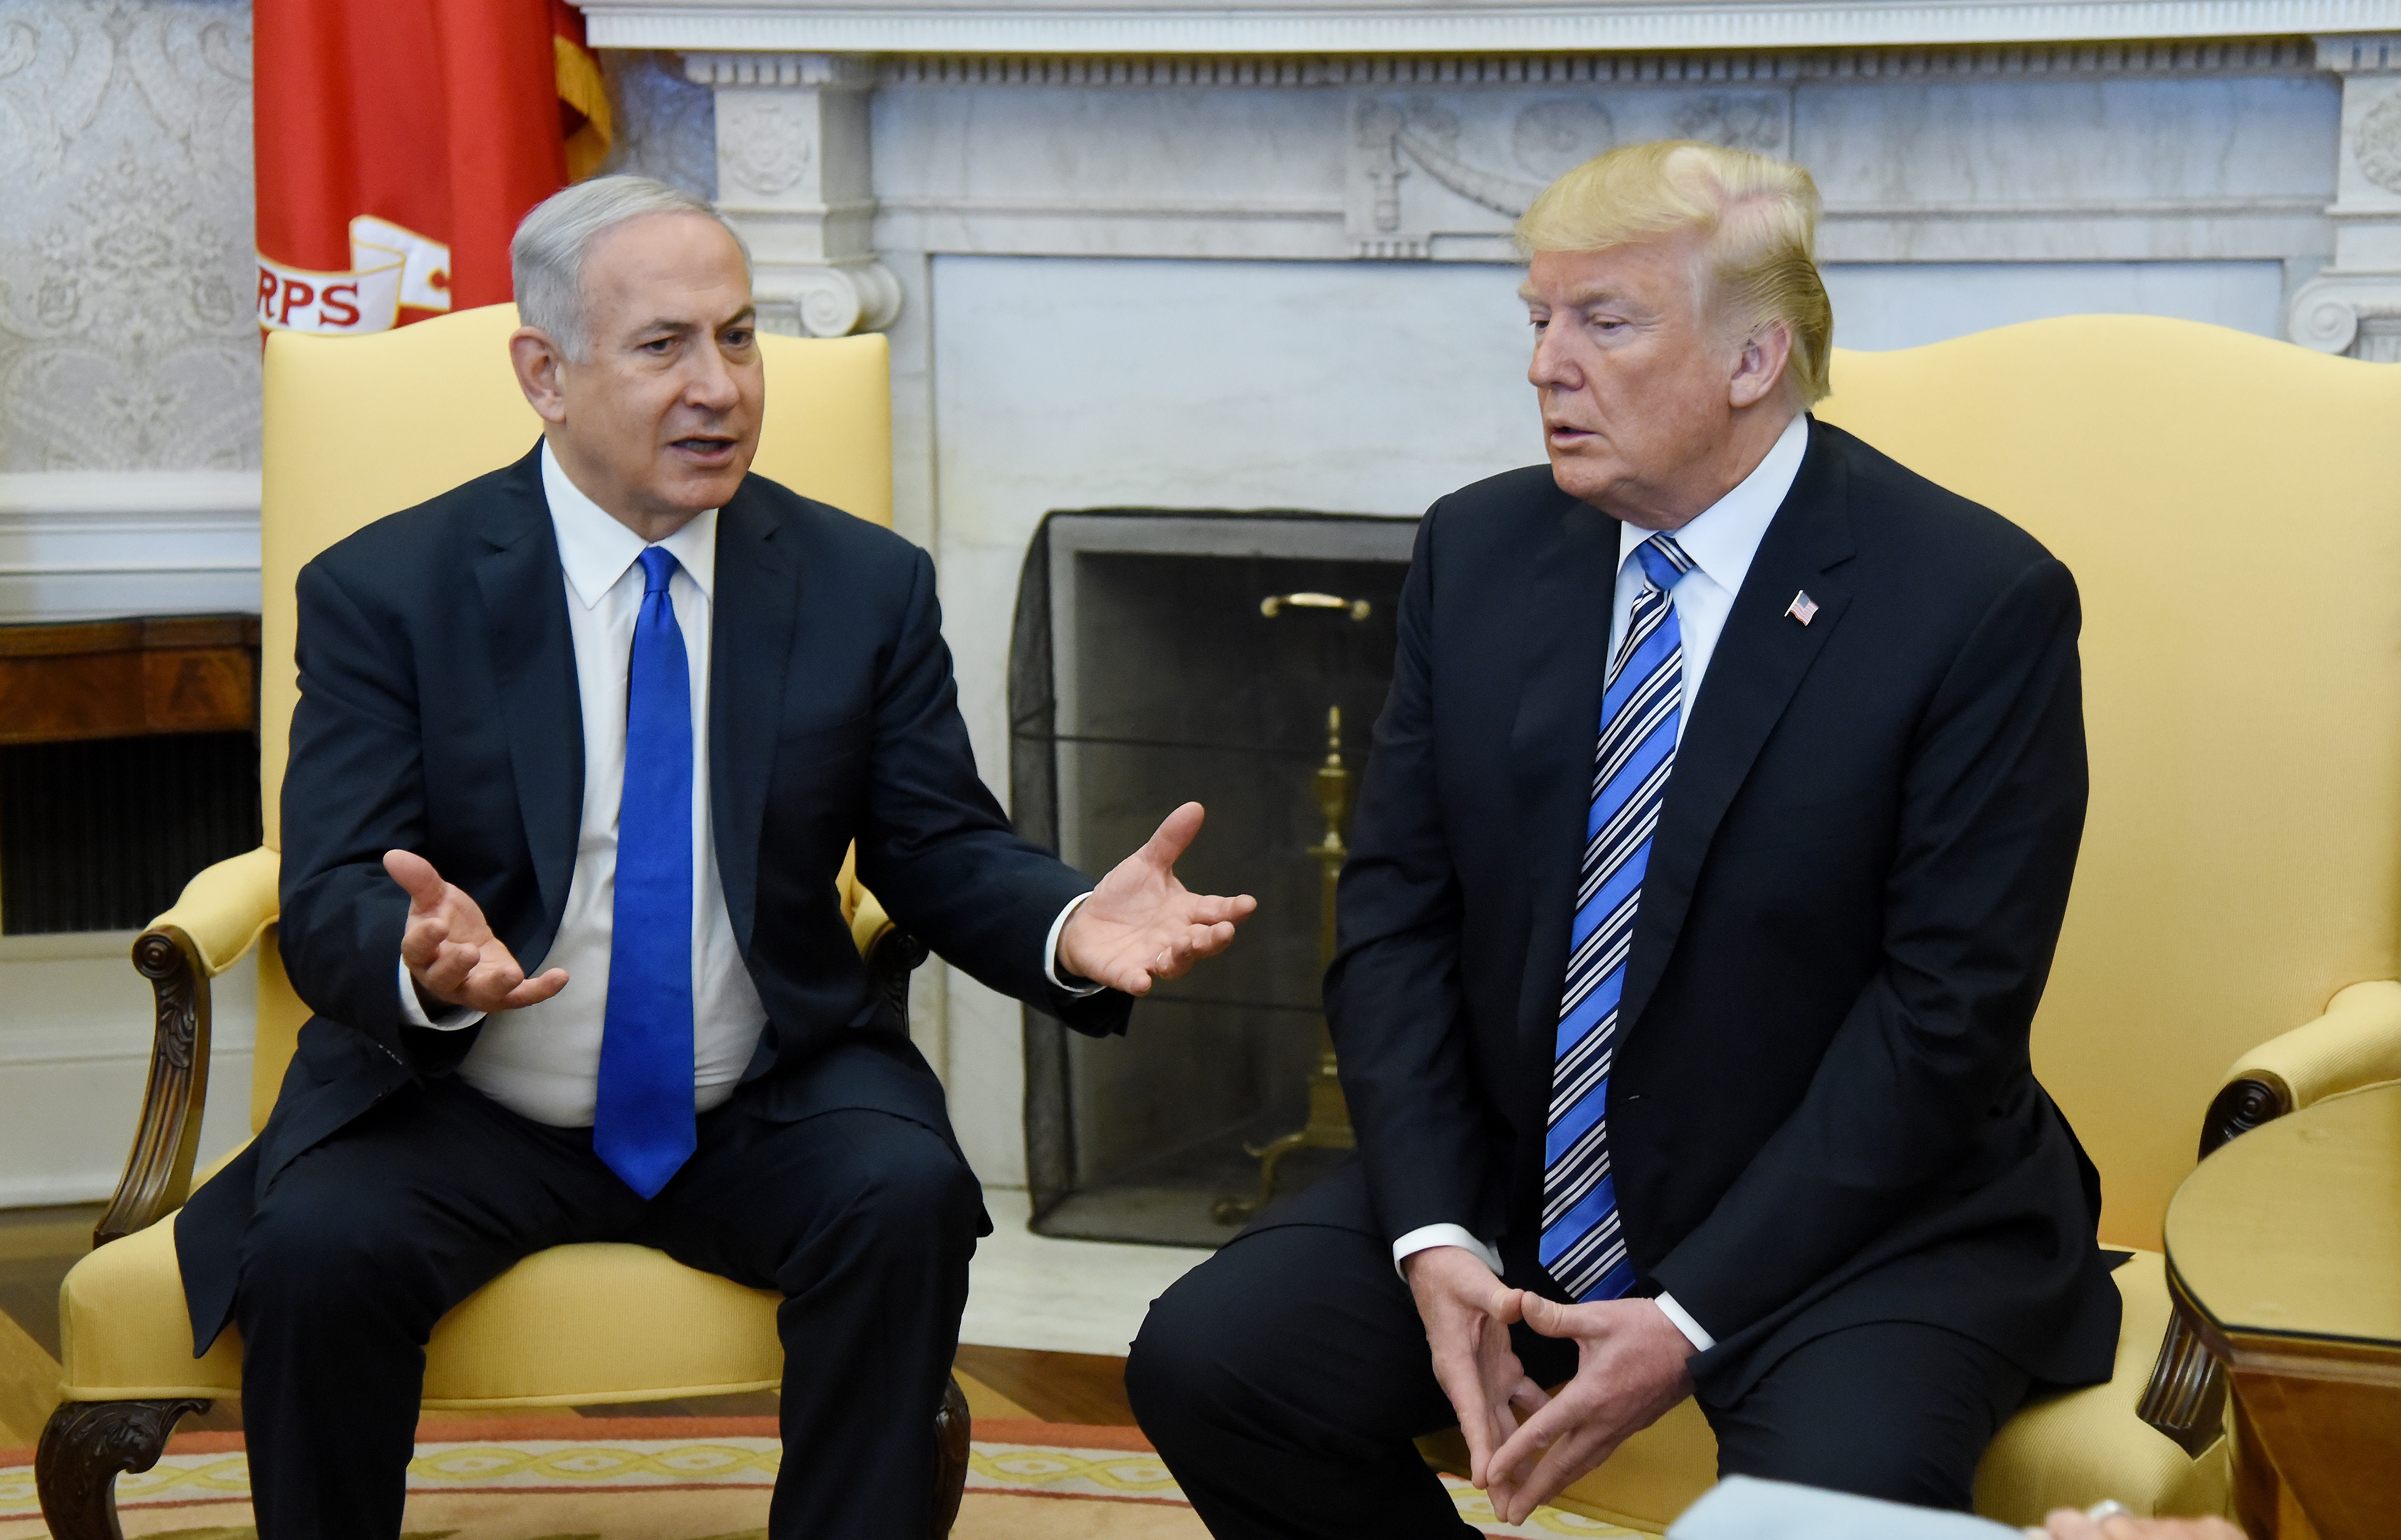 President Donald Trump and Israeli Prime Minister Benjamin Netanyahu meet in the Oval Office of the White House on March 5, 2018.